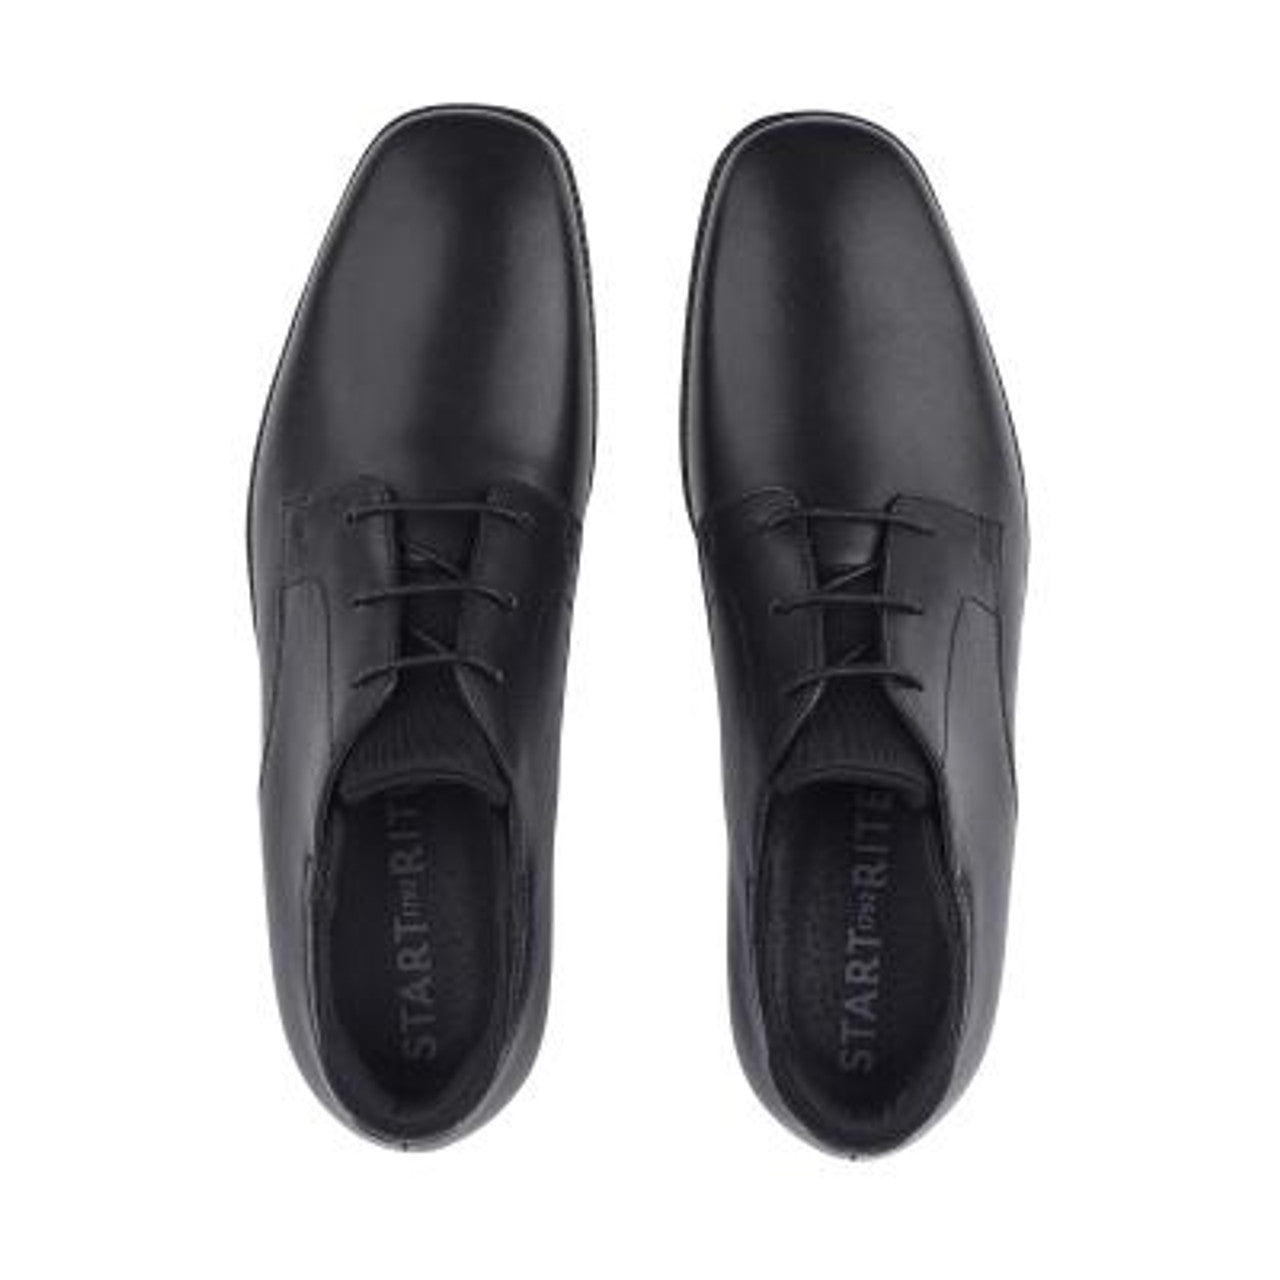 A pair of boys smart school shoes by Start Rite, style Academy, in black leather with lace up fastening. Above view.